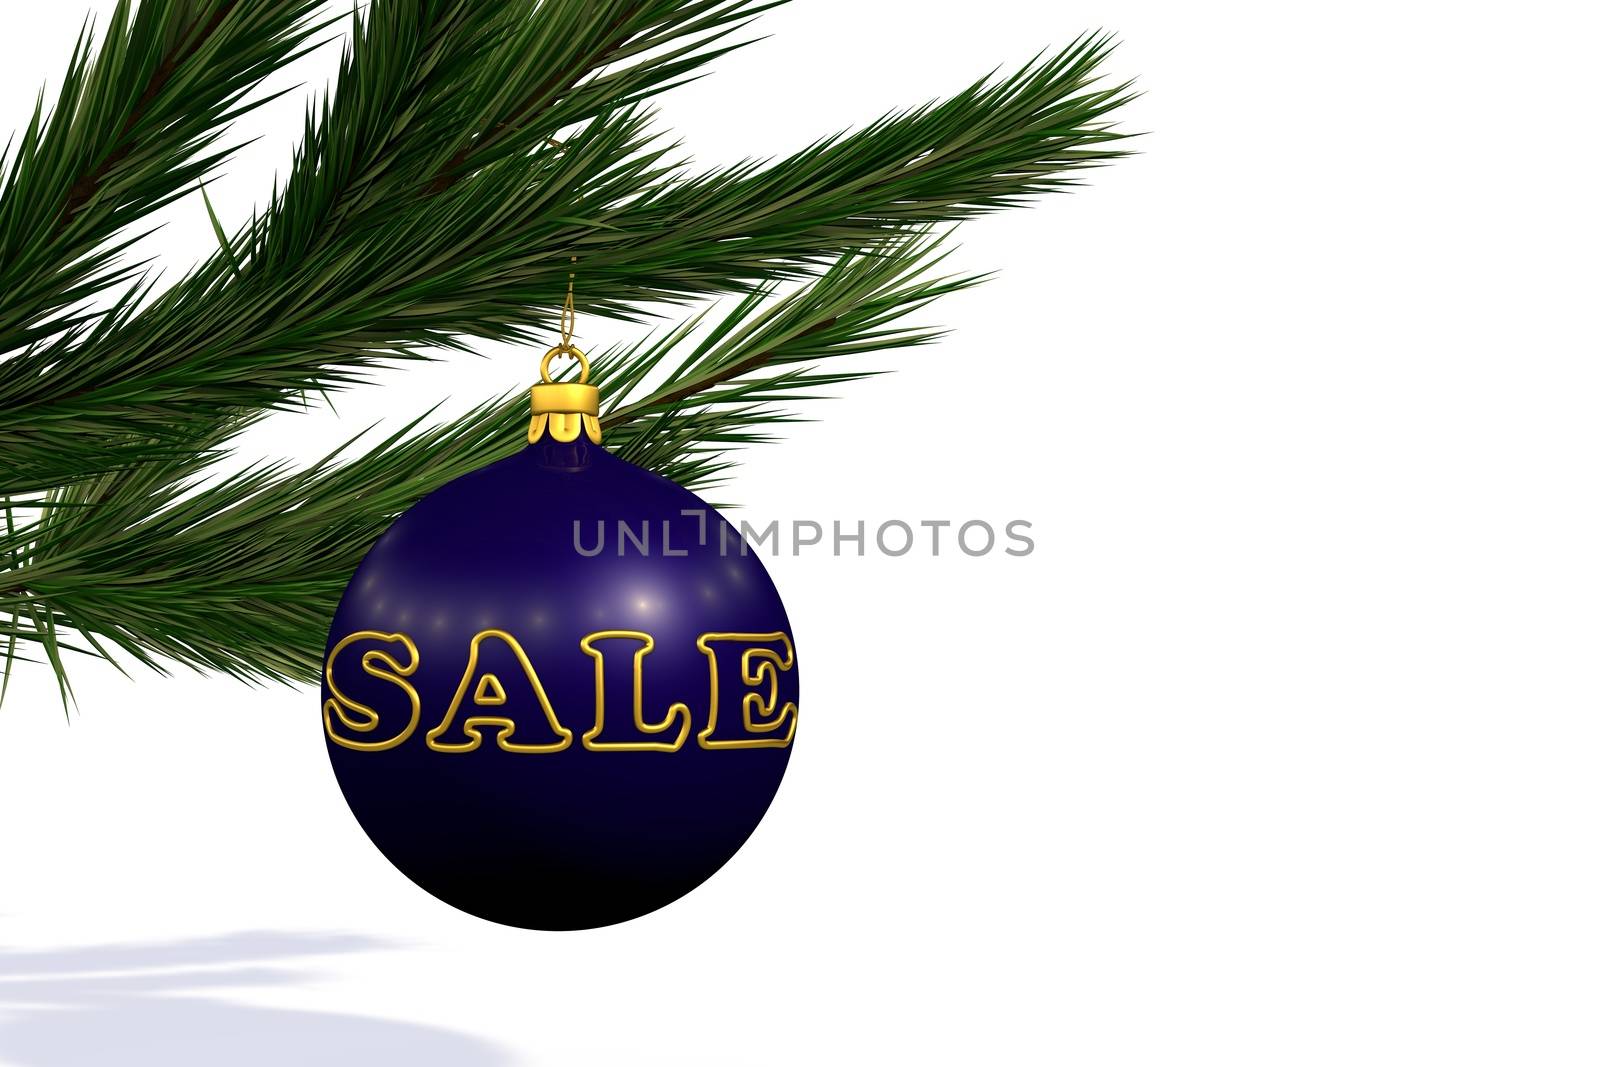 blue Christmas decoration ball sale on Christmas tree branch isolated on white